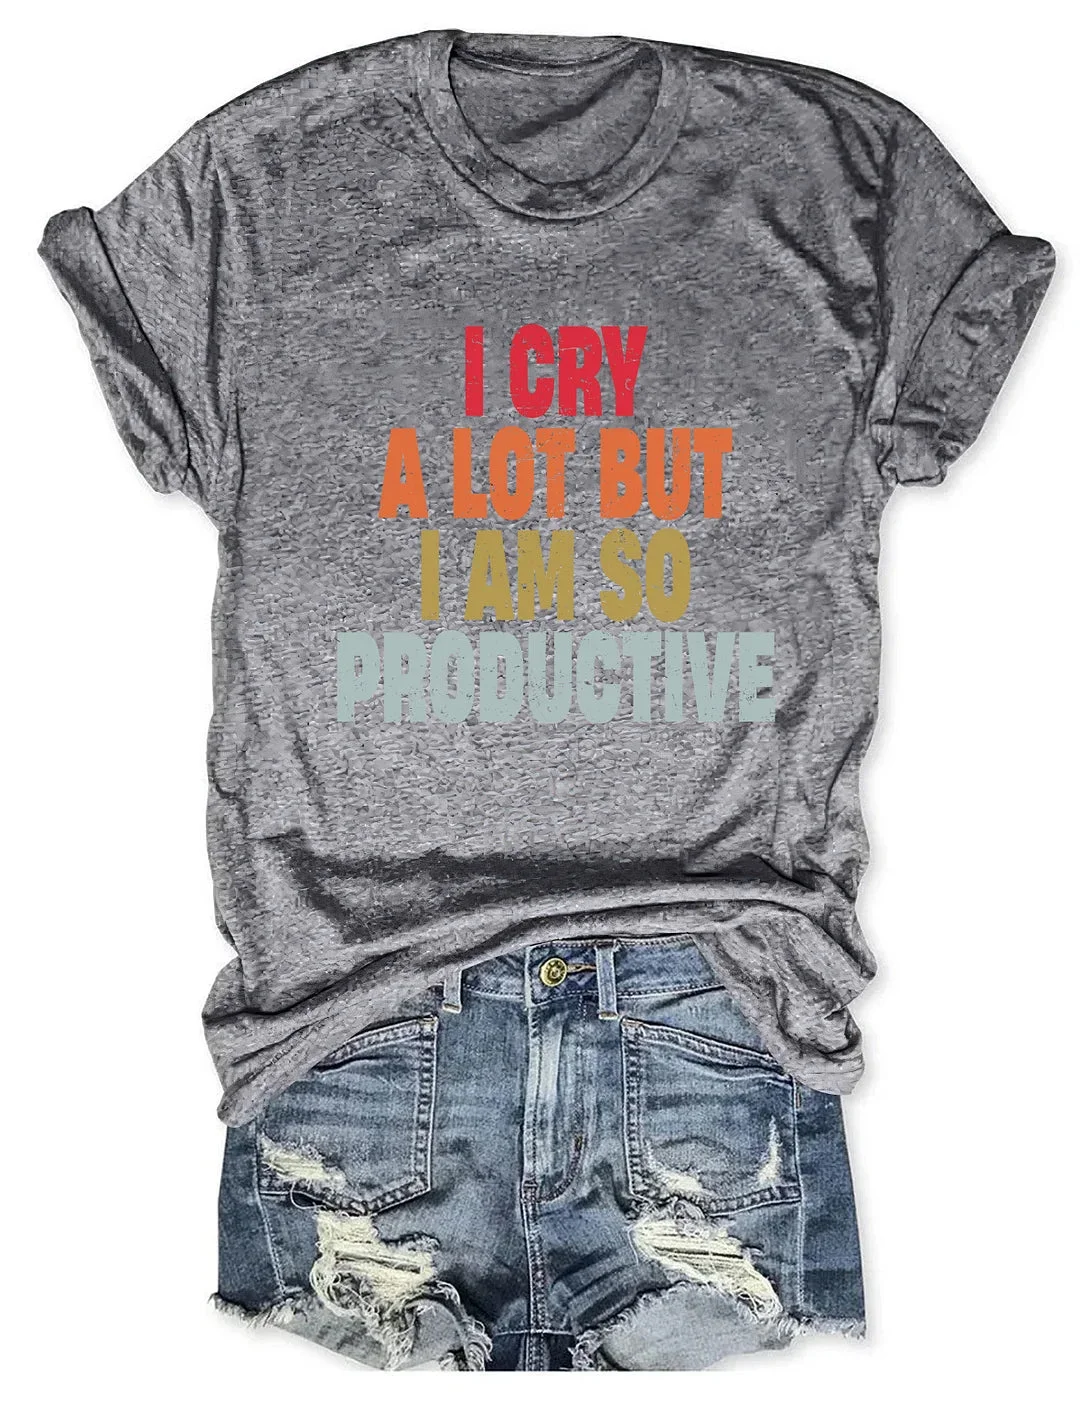 I Cry A Lot But I Am So Productive Printed Round Neck Short Sleeve T-Shirt